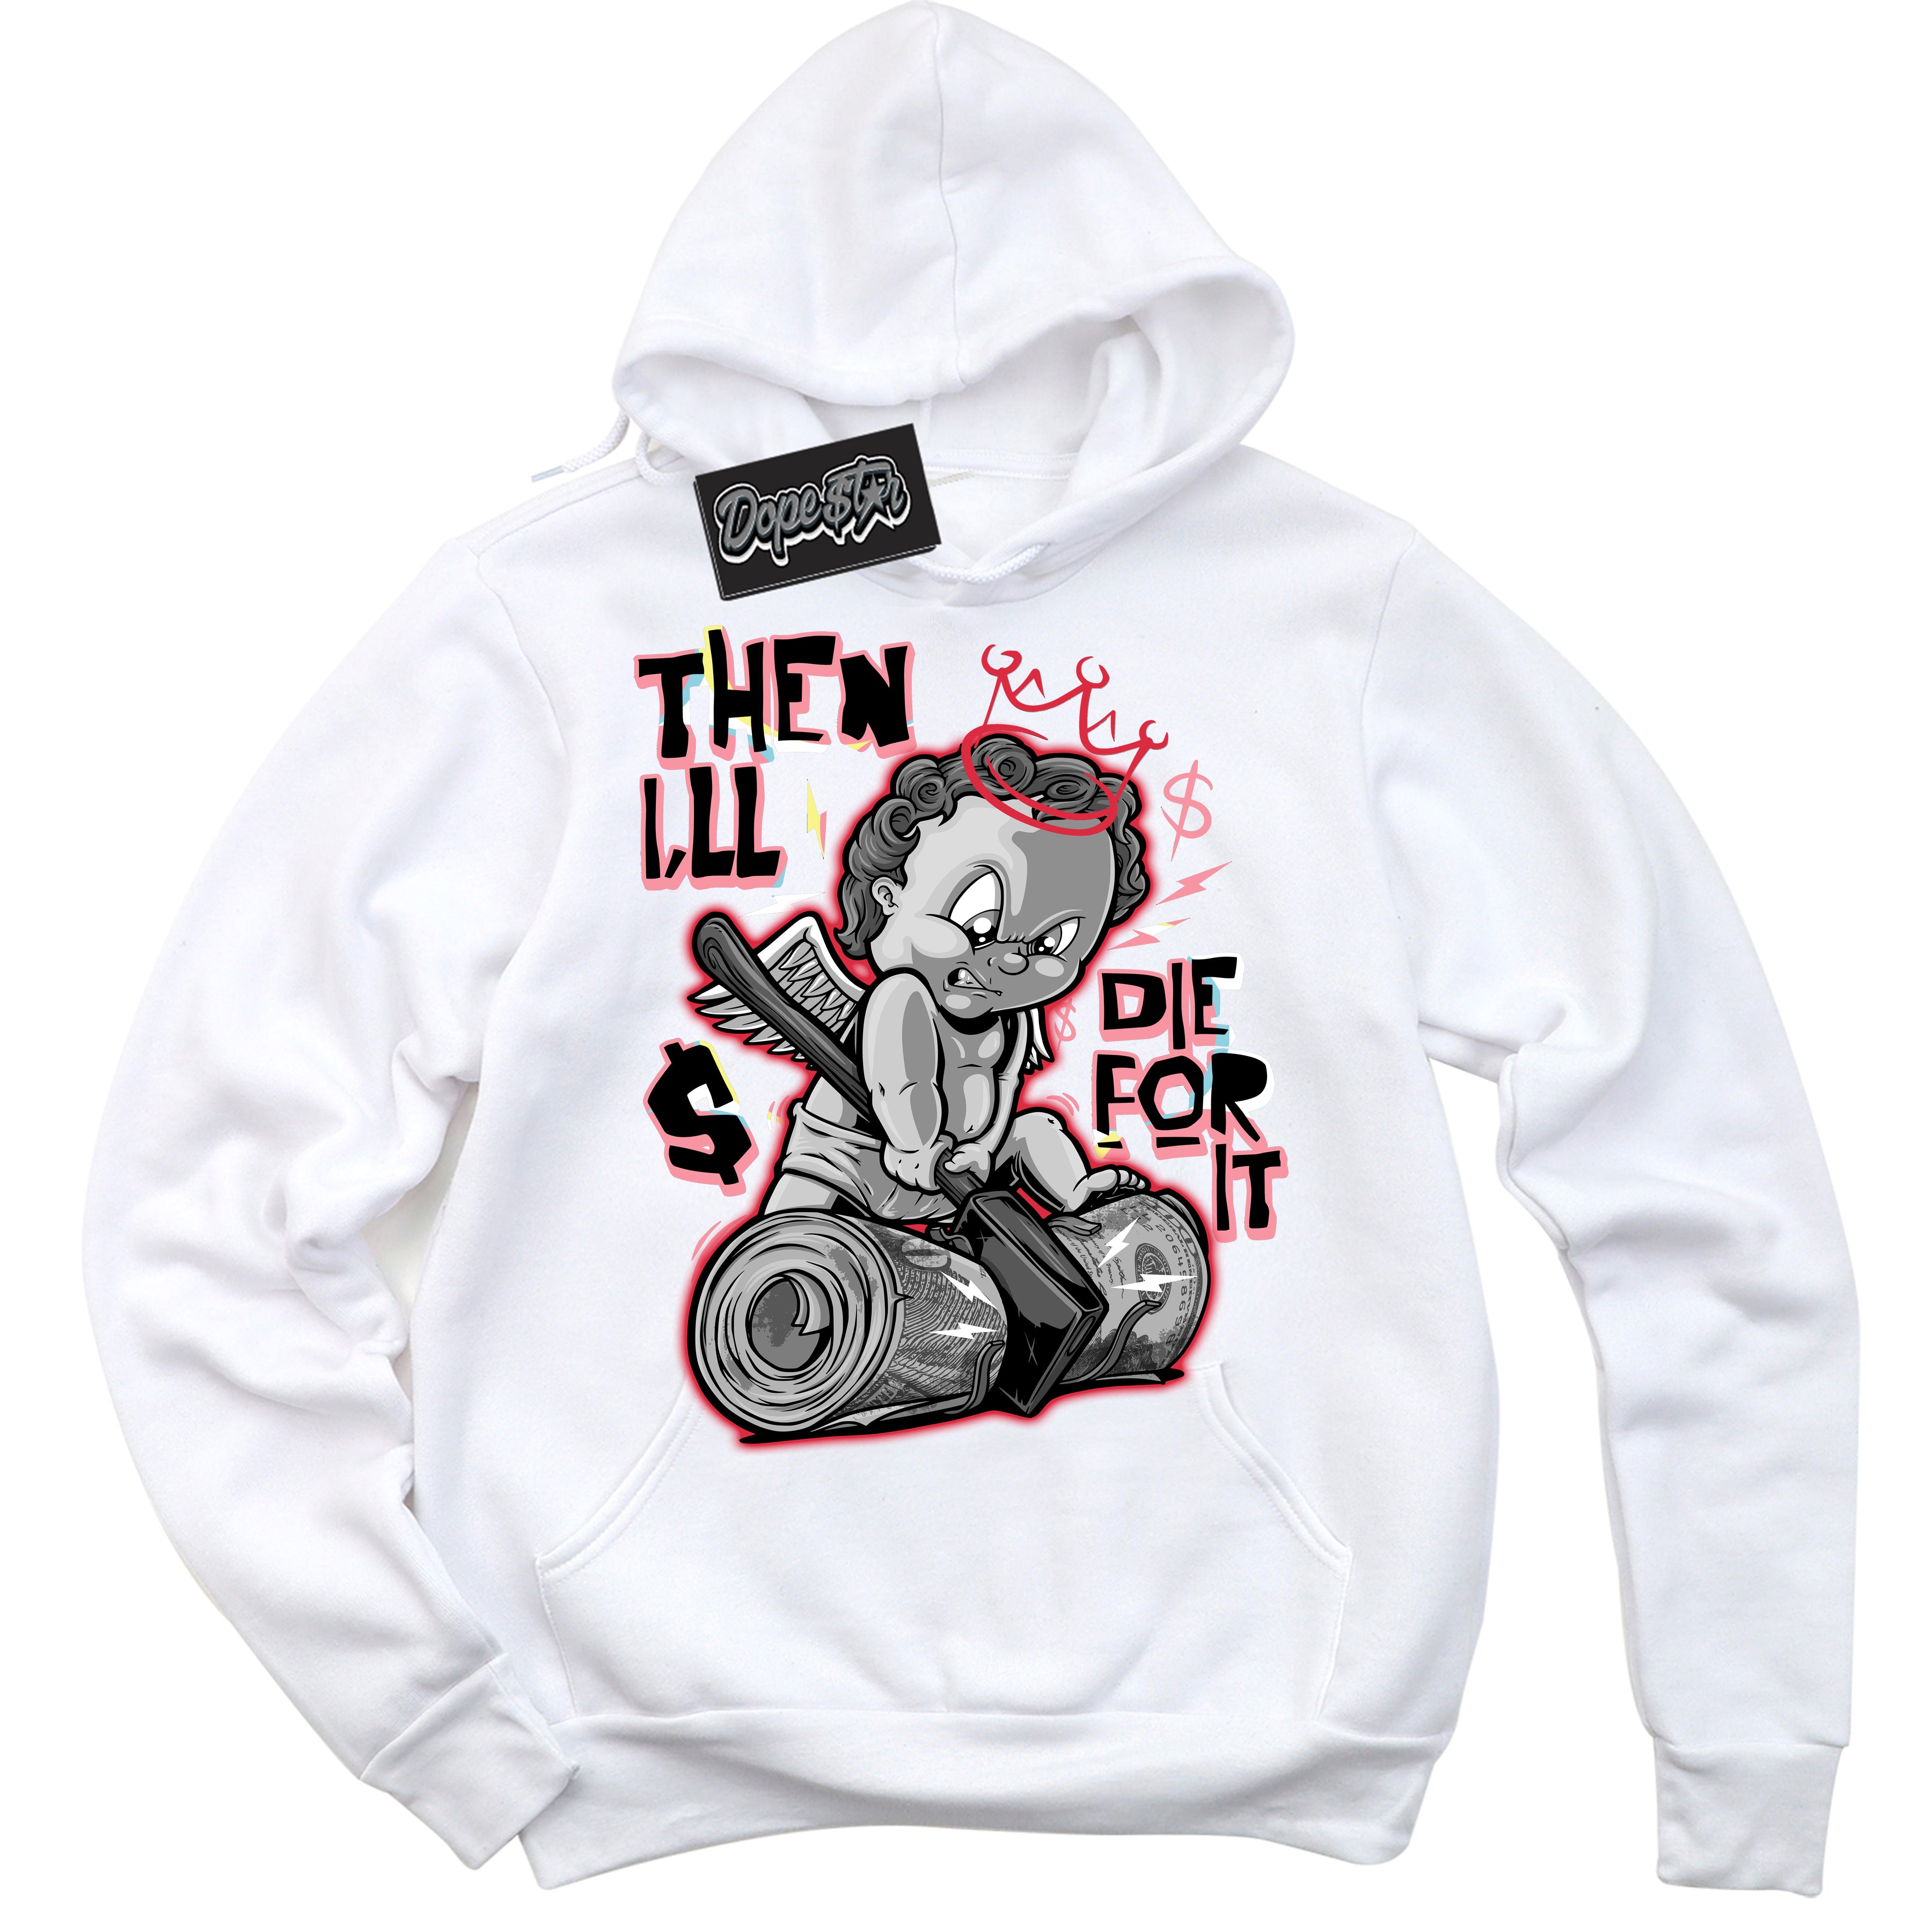 Cool White Graphic DopeStar Hoodie with “ Then I'll “ print, that perfectly matches Spider-Verse 1s sneakers